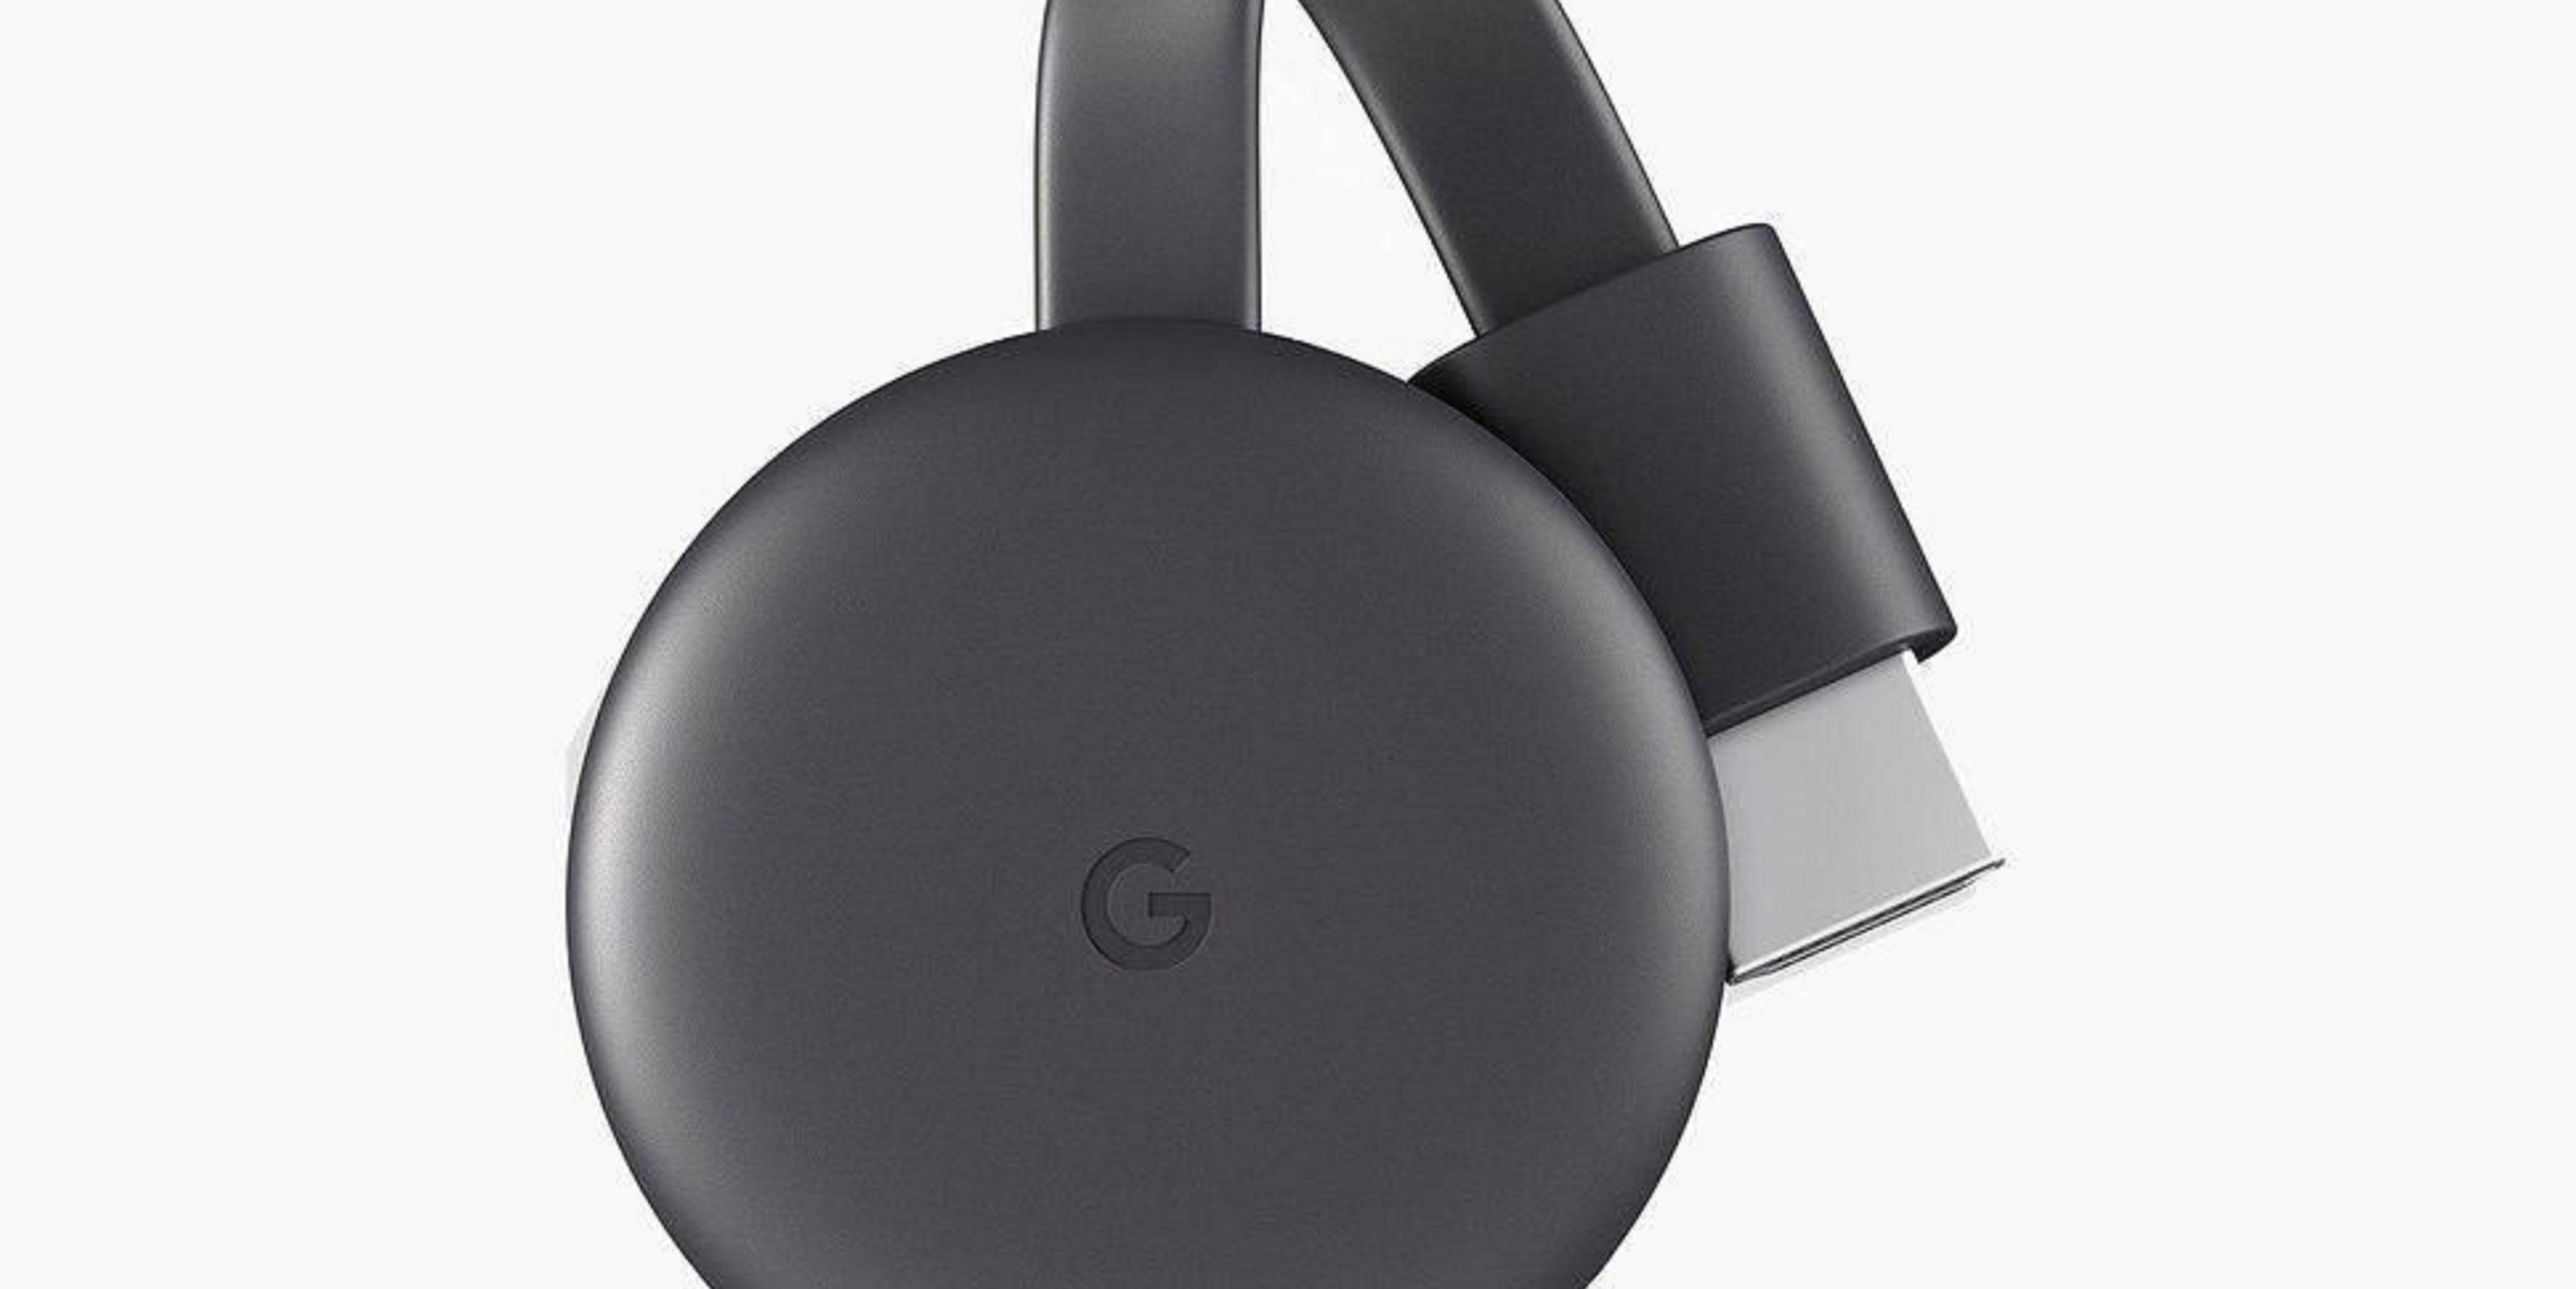 Stream the entertainment you love to your TV in up to 4K resolution with the Google Chromecast 